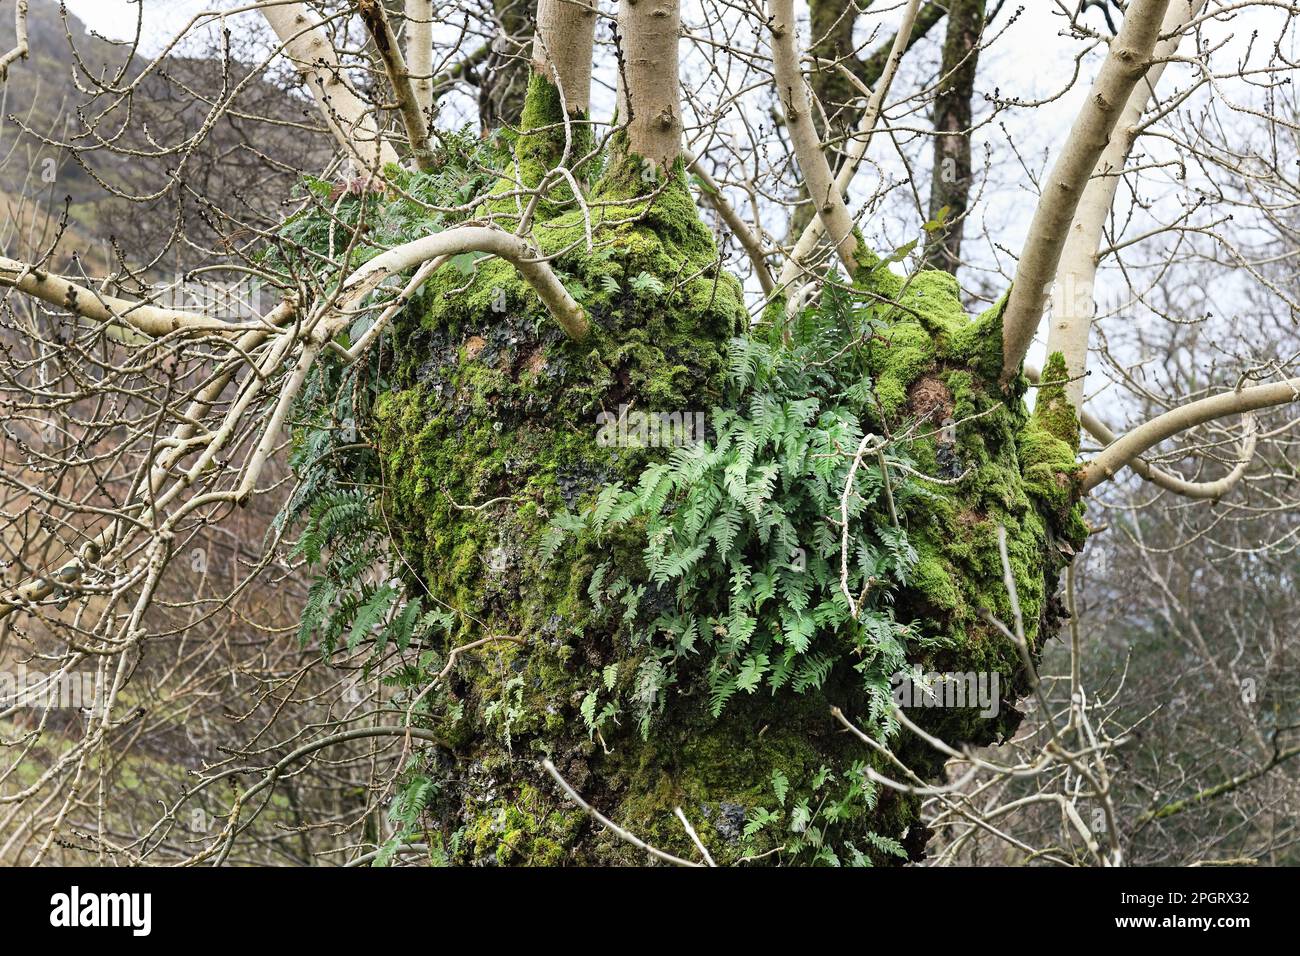 Pollarded mature Ash tree (Fraxinus excelsior) covered in Ferns, Lichens and Mosses. Such trees create a habitat for many species of fauna, invertebra Stock Photo